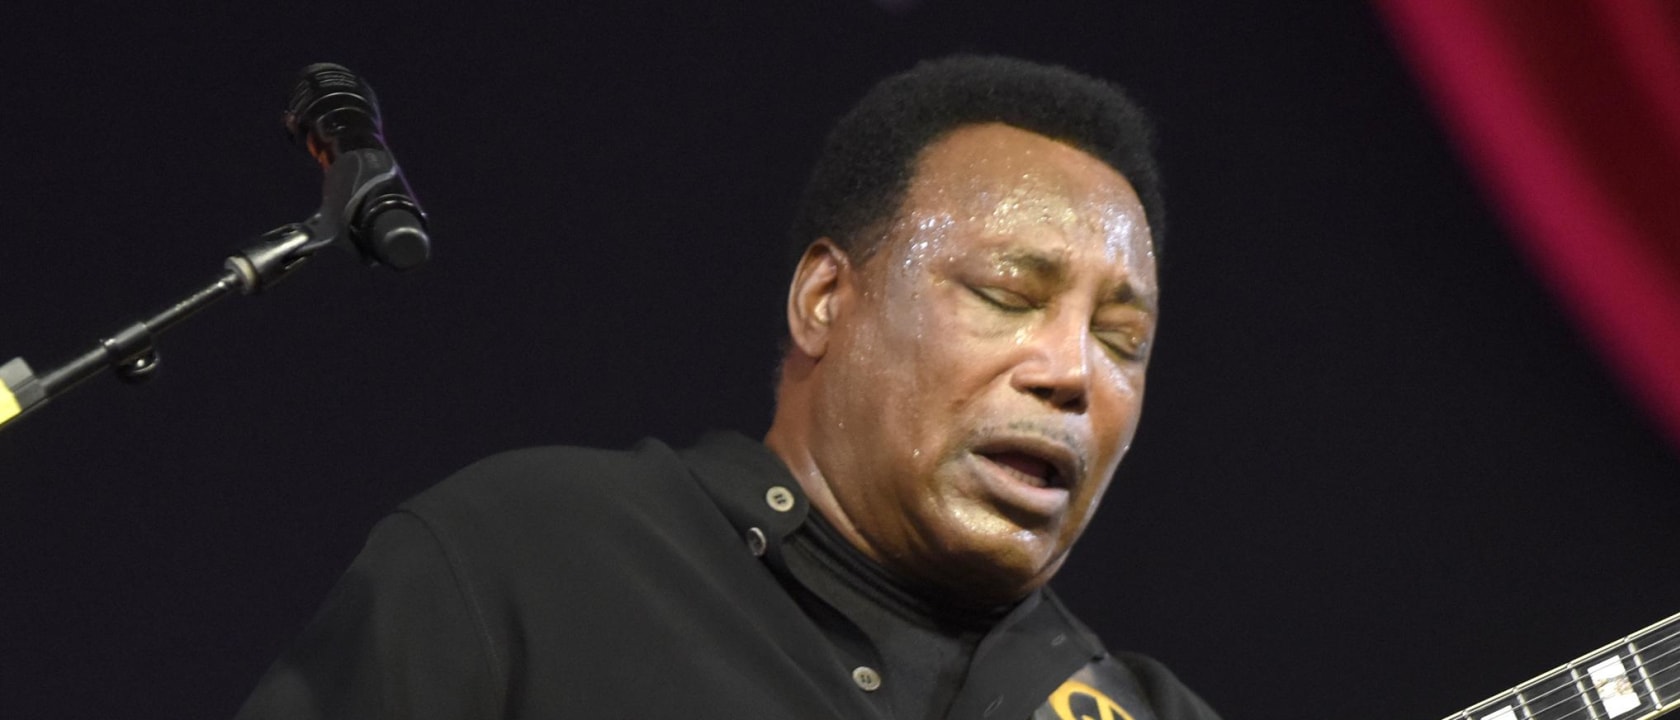 George Benson performing live at a concert in 2025